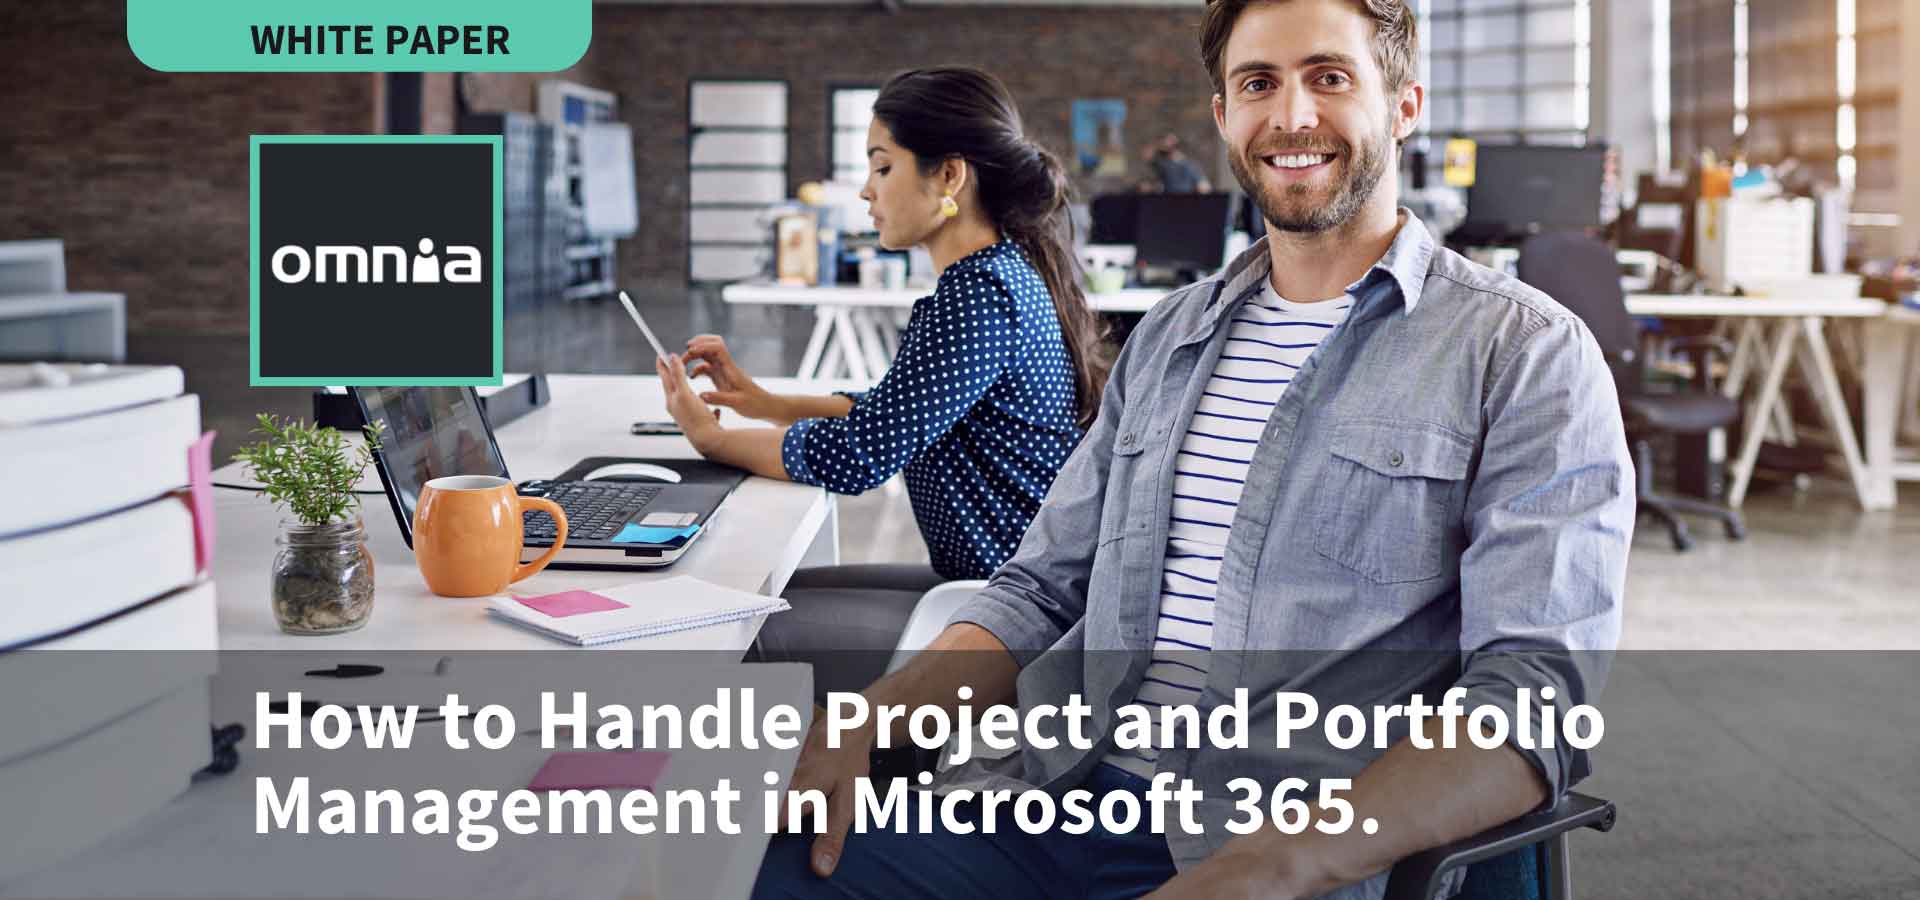 Document: Project and Portfolio Management in Microsoft 365